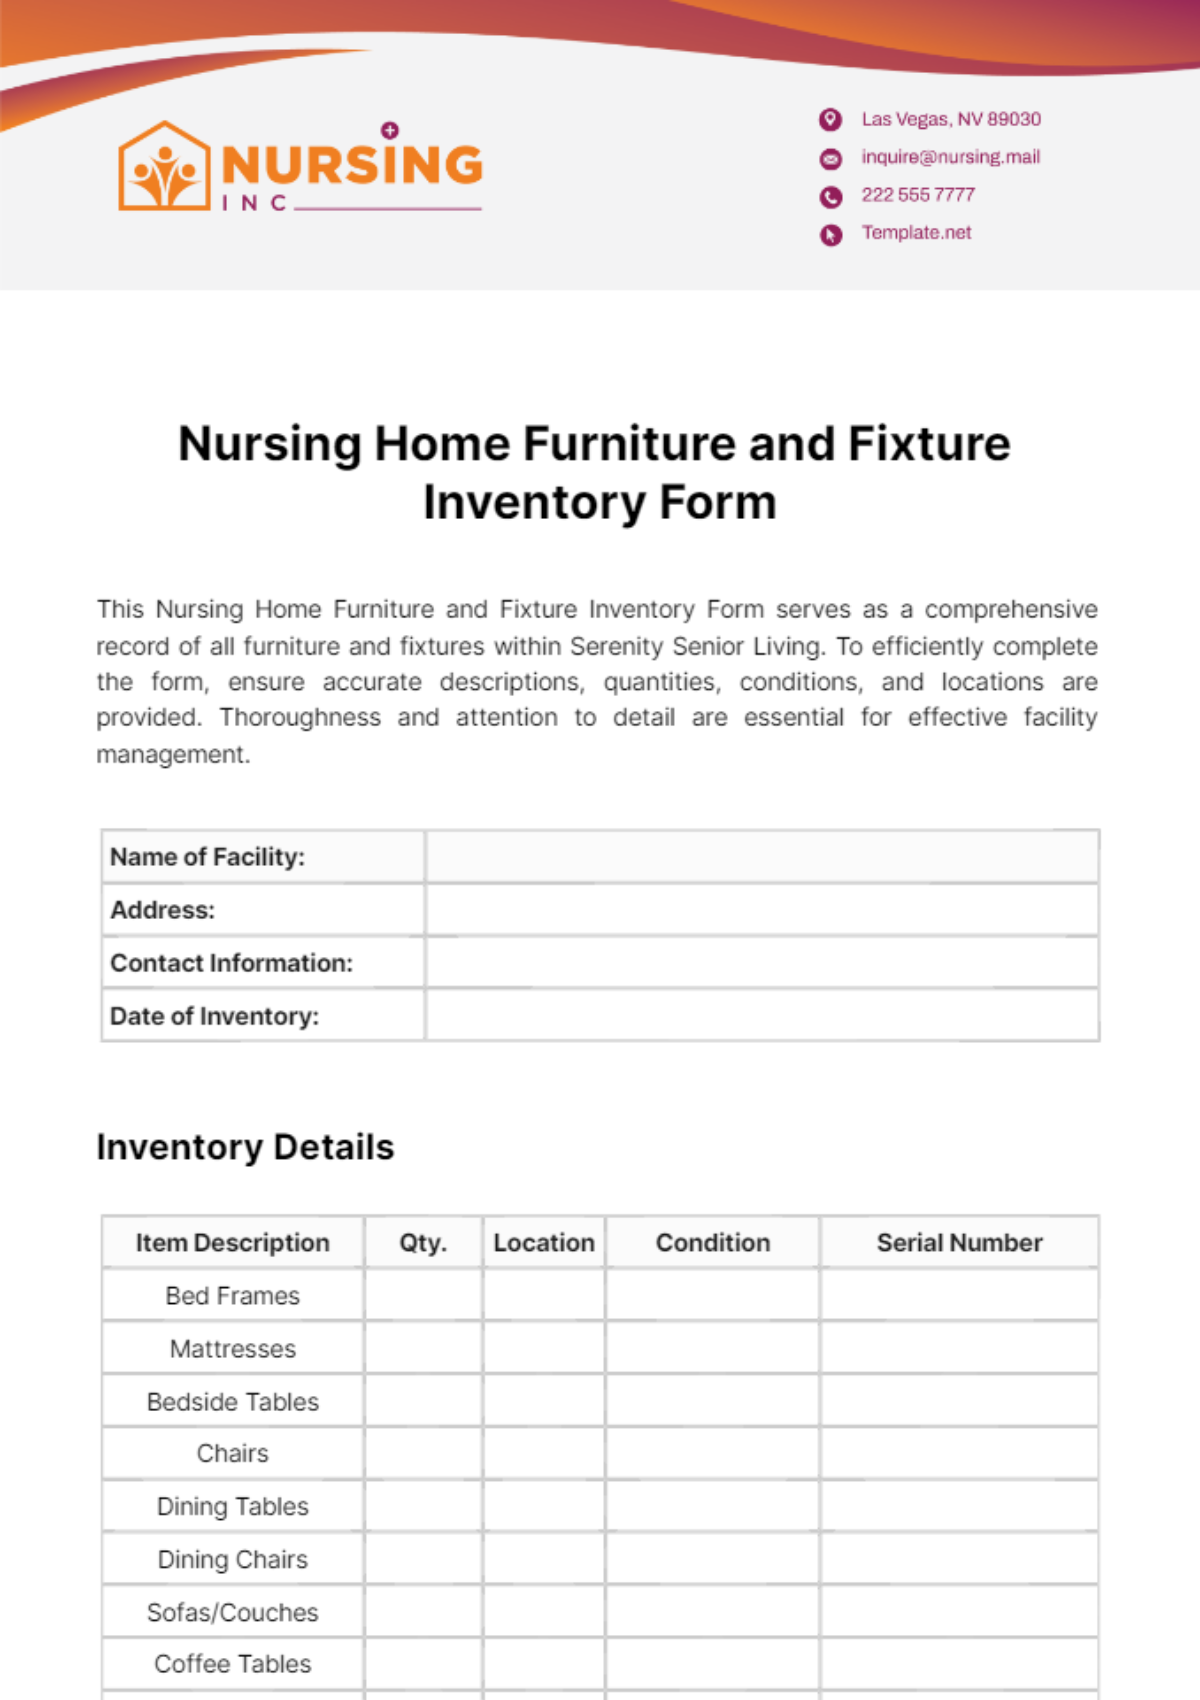 Nursing Home Furniture and Fixture Inventory Form Template